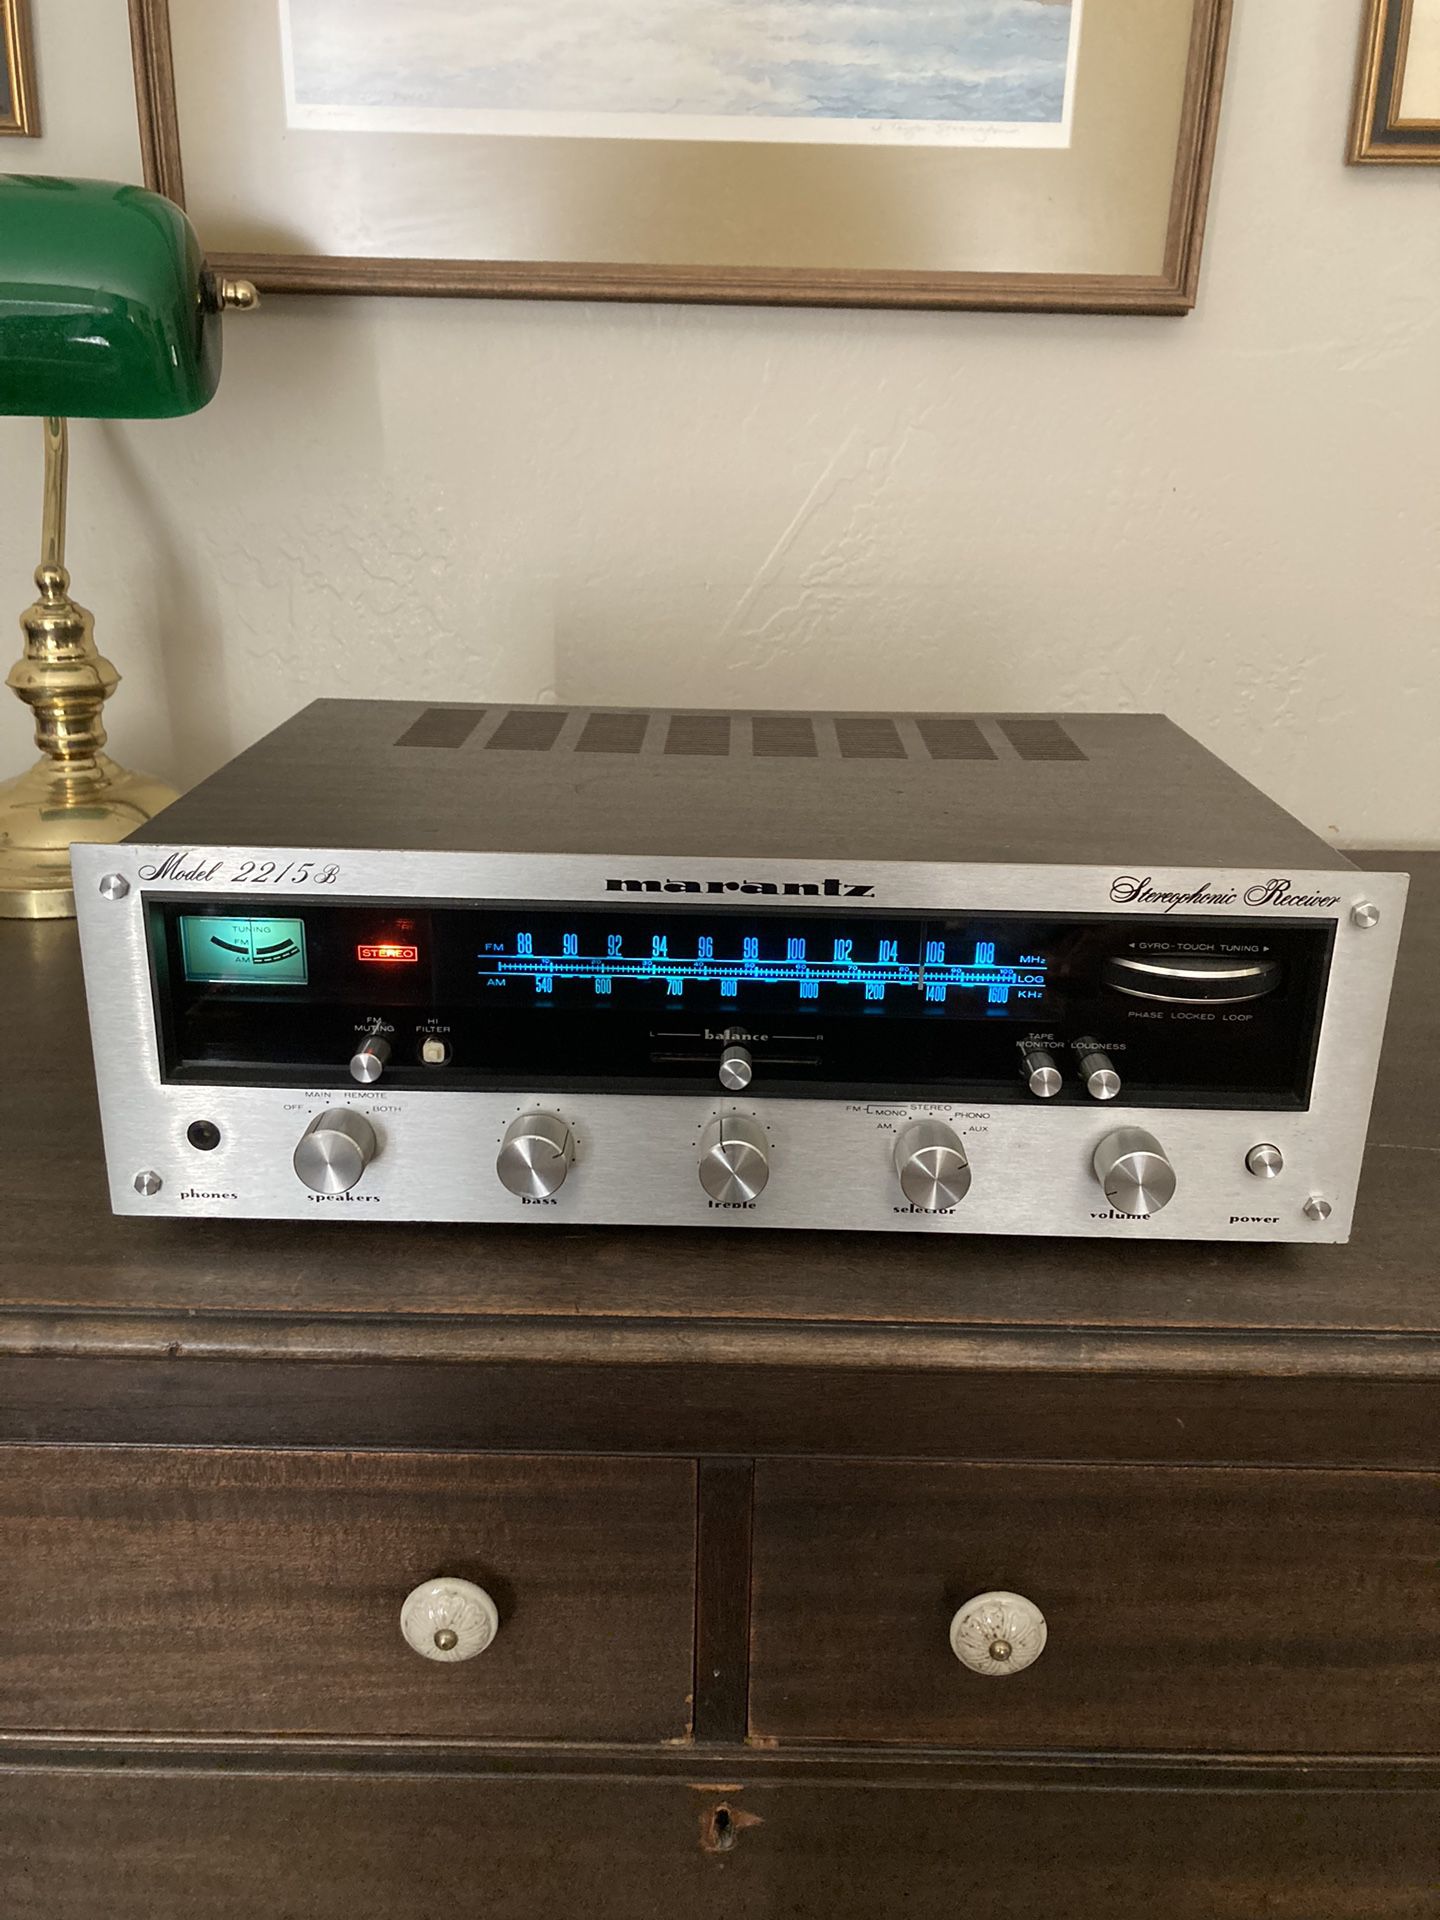 Vintage Marantz 2215B Stereo Receiver For Sale Or Trade